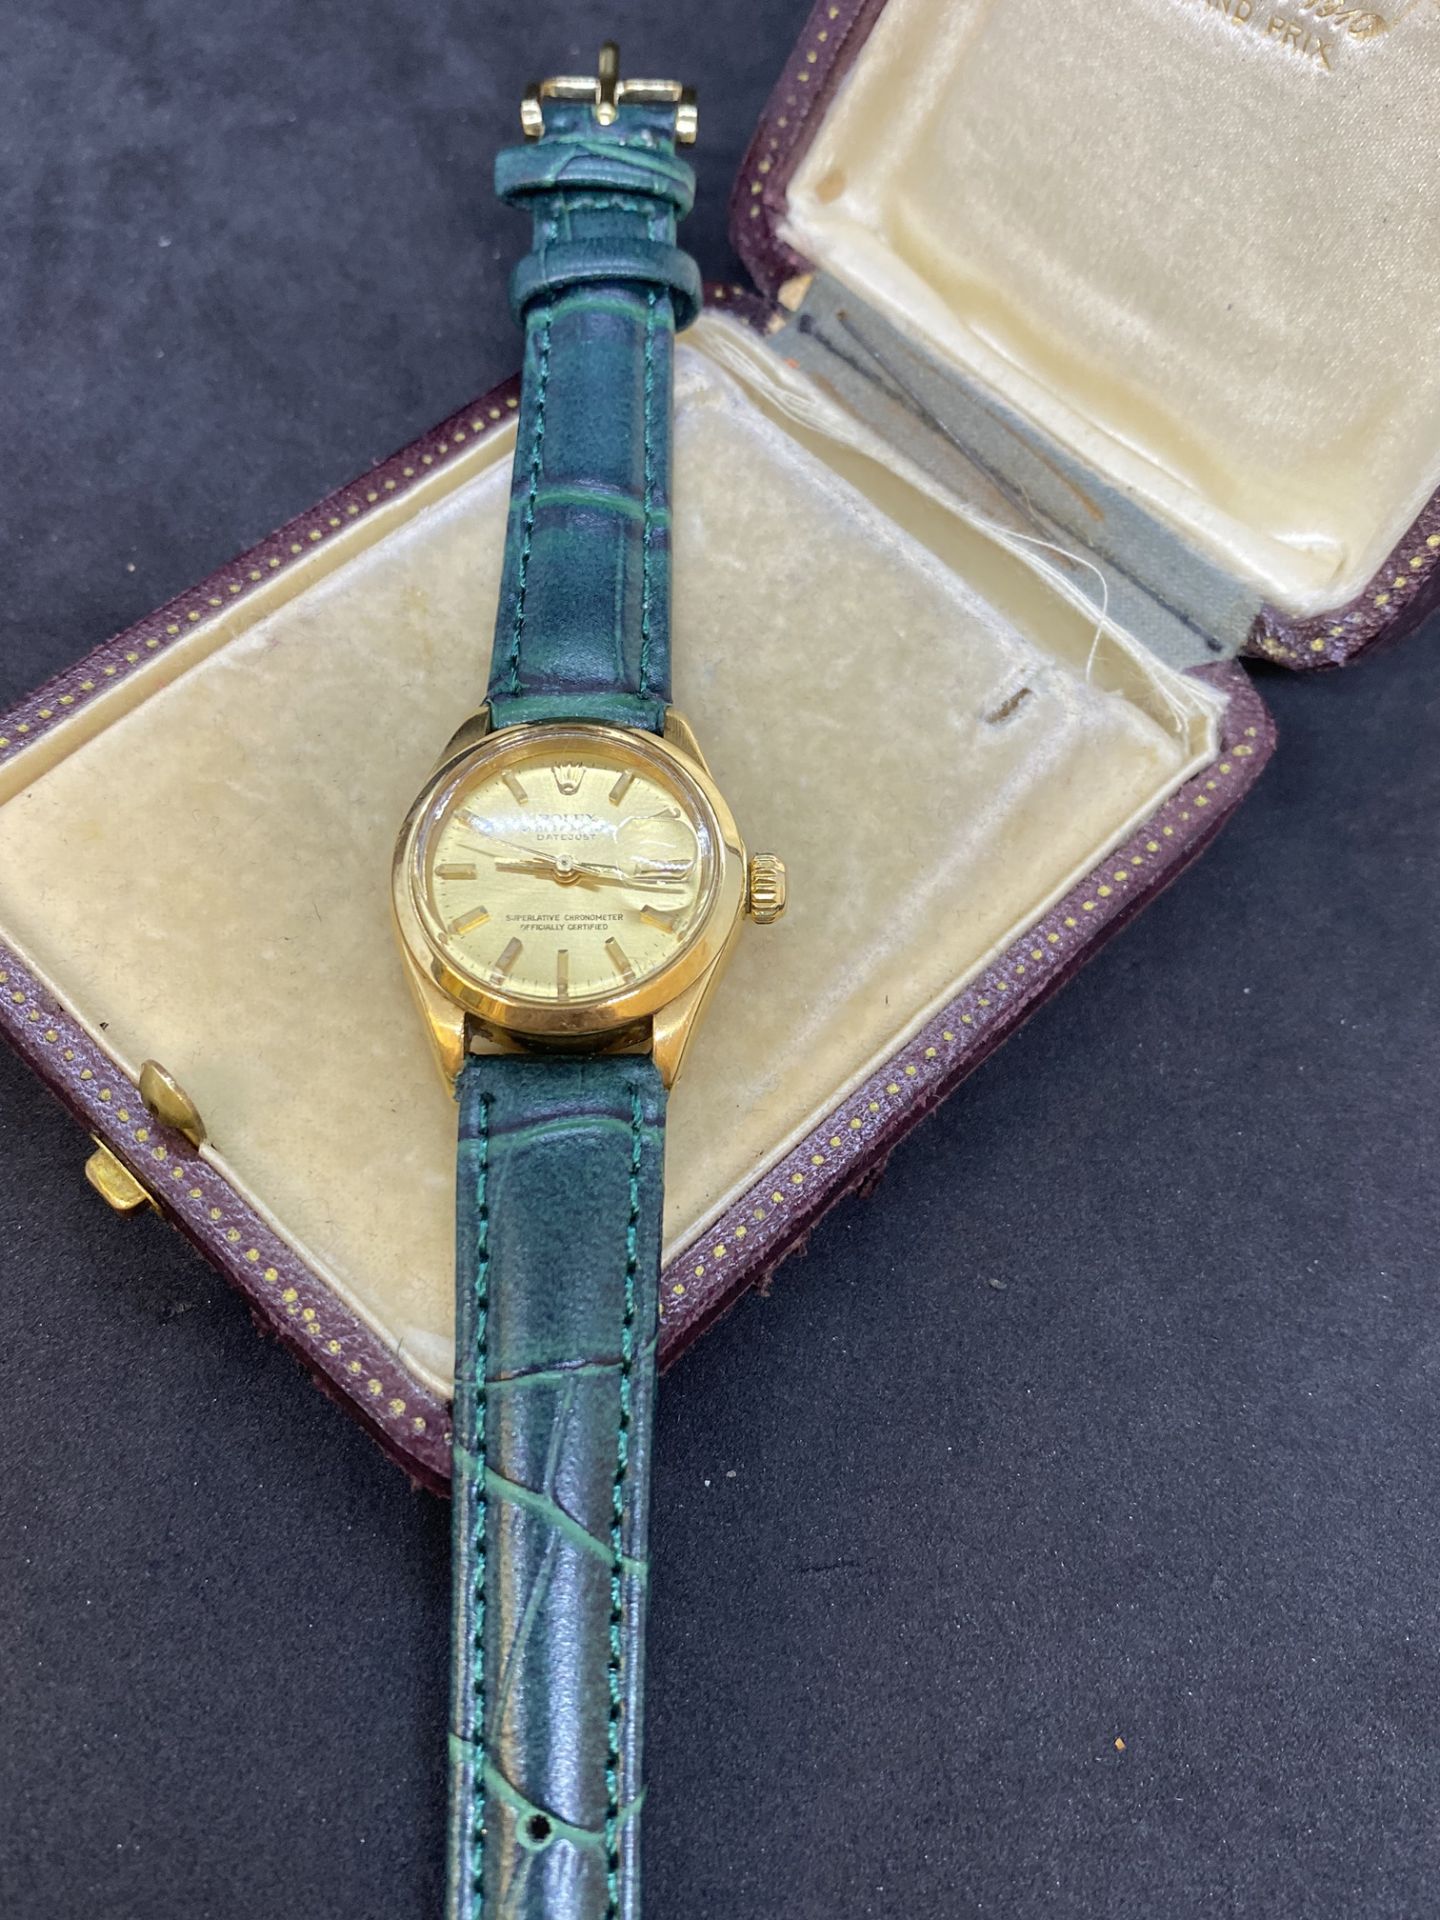 18ct GOLD ROLEX WATCH ON LEATHER STRAP - Image 4 of 8